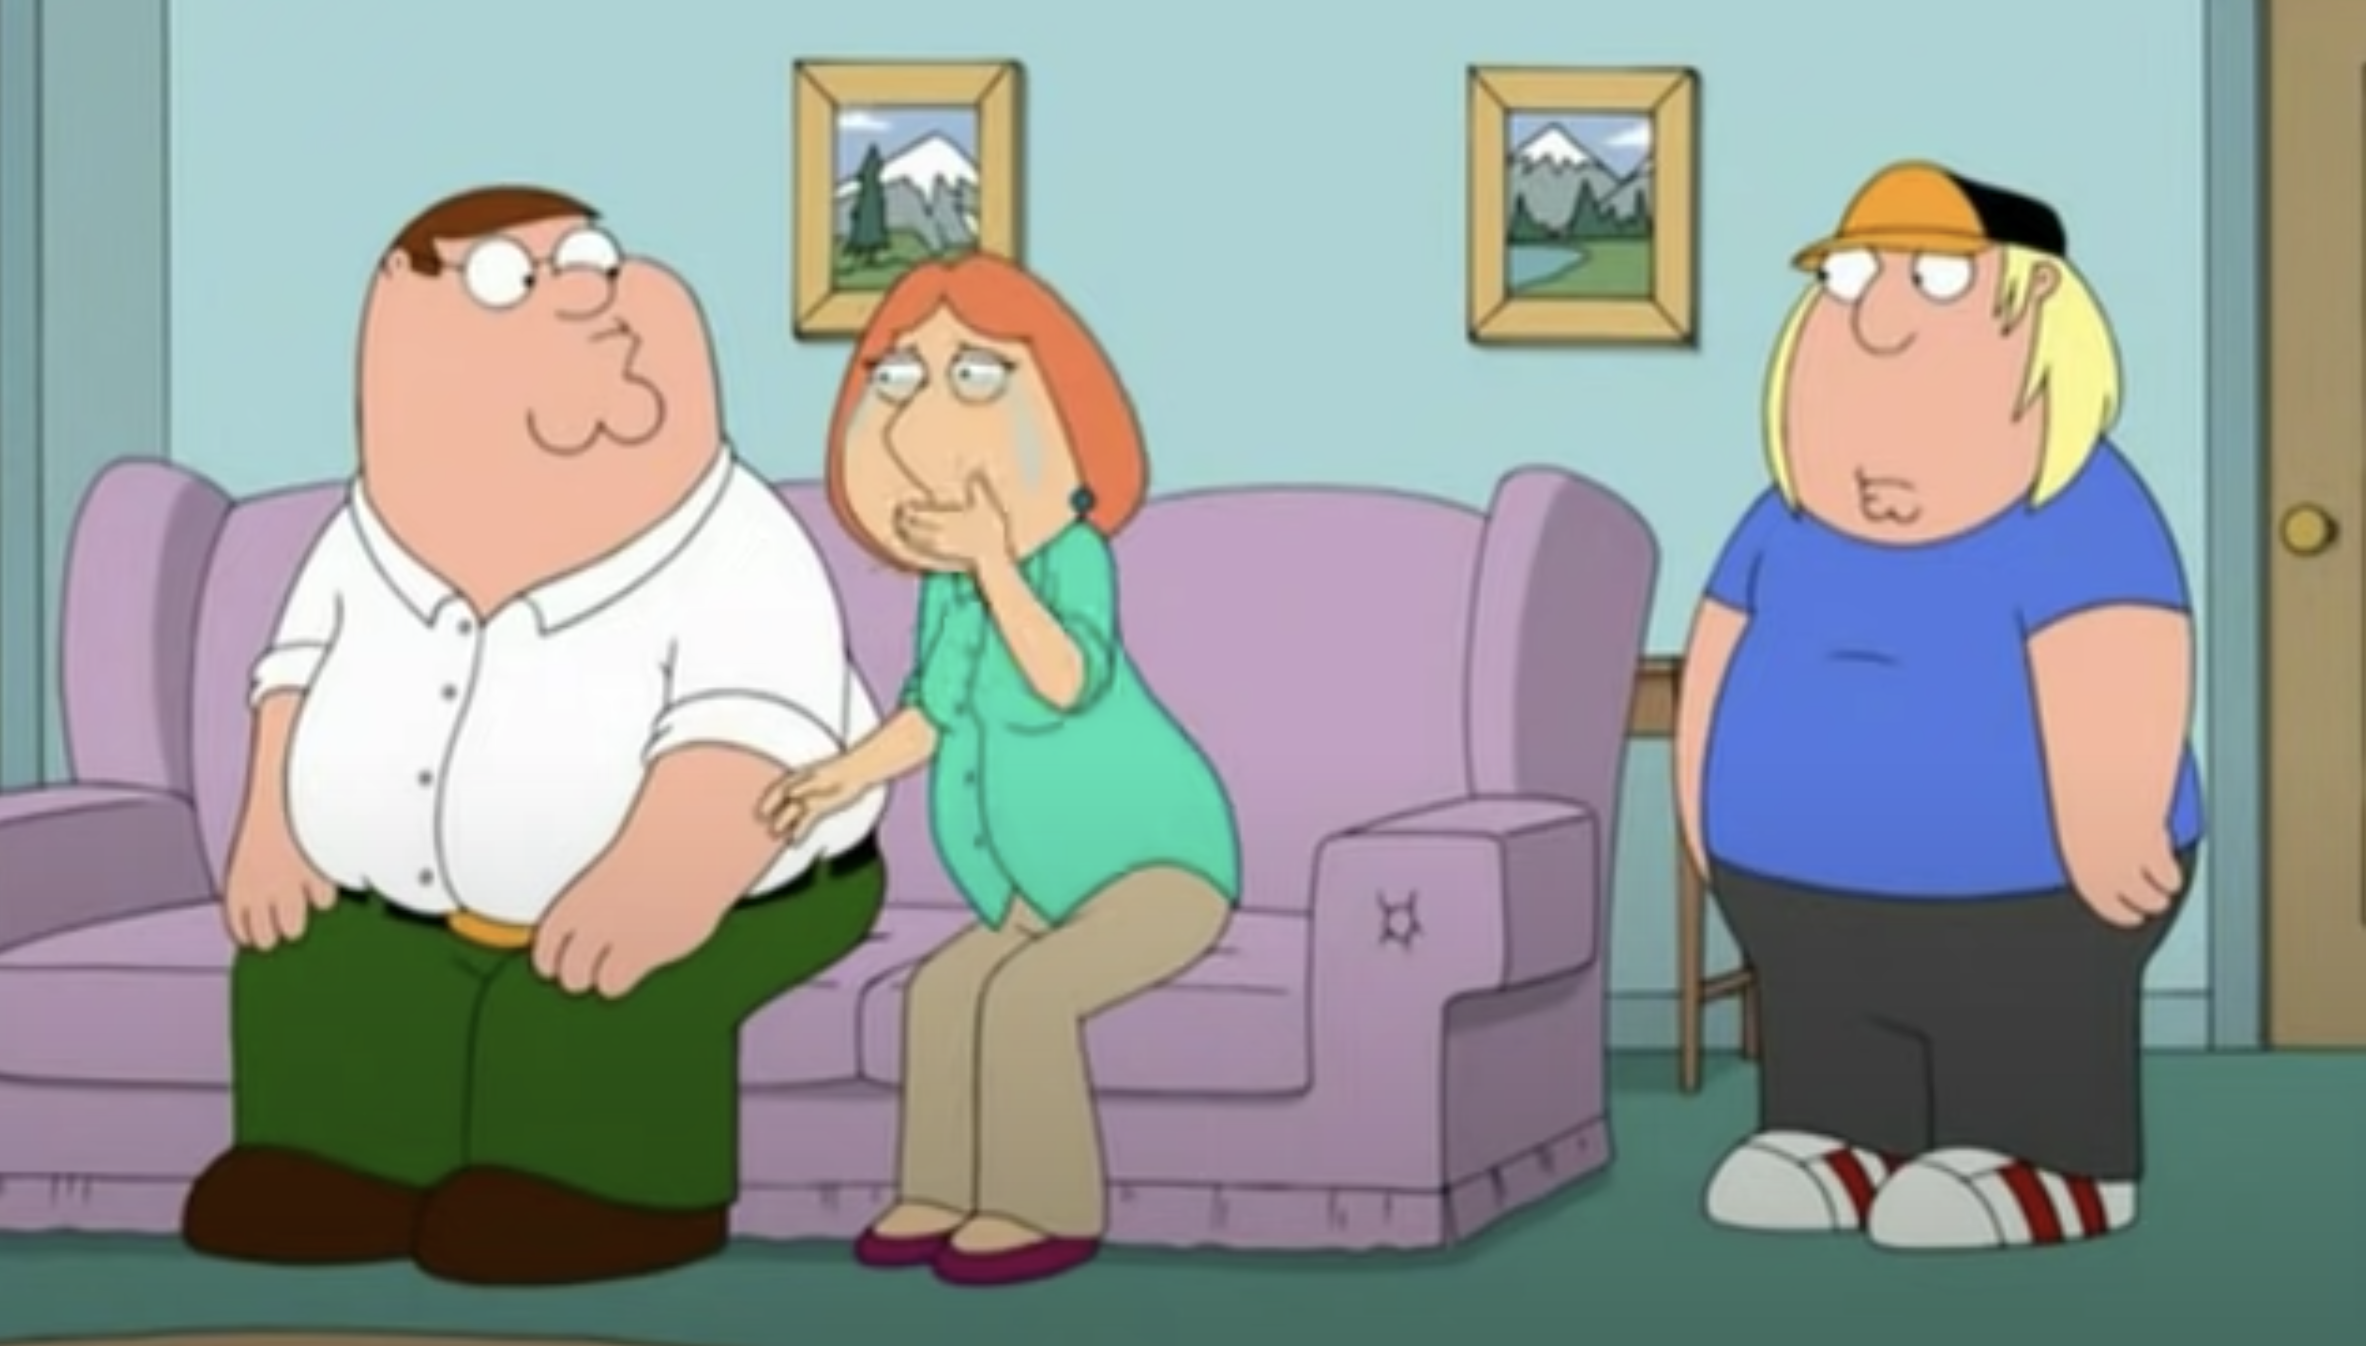 Animated man and woman sit on a couch as the woman covers her mouth with her hand